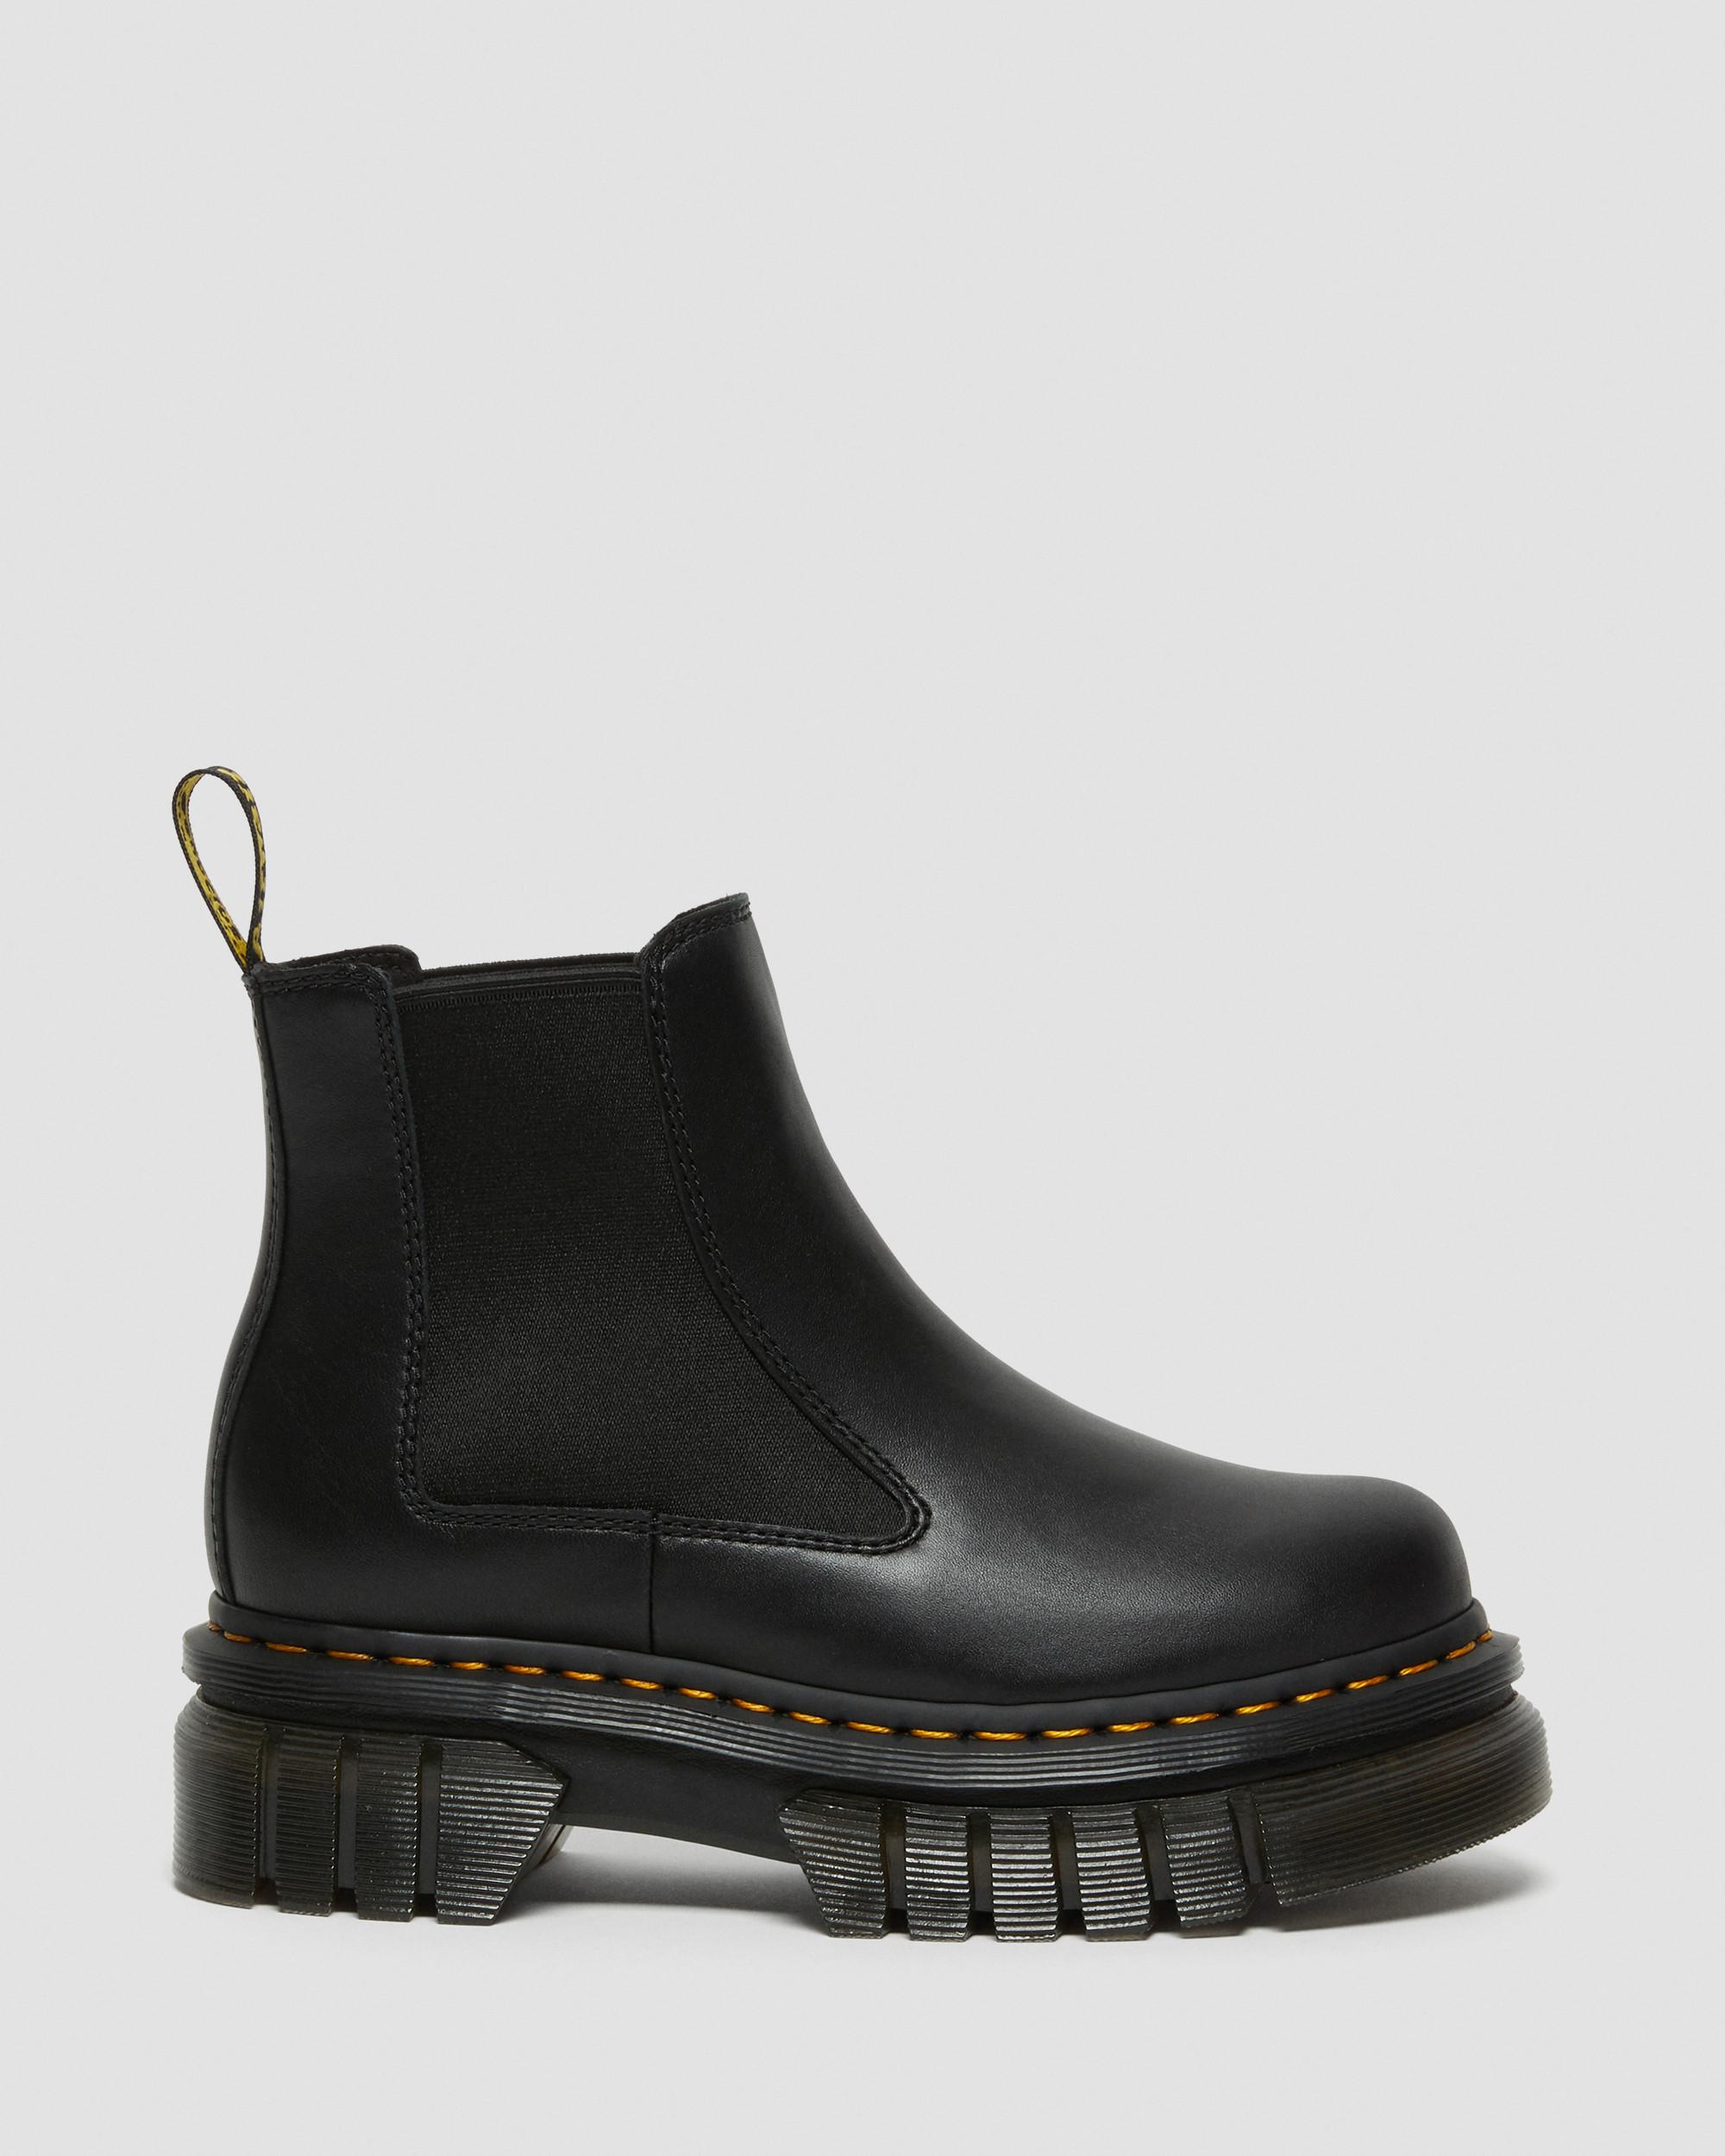 Audrick Nappa Leather Platform Chelsea Boots in Black